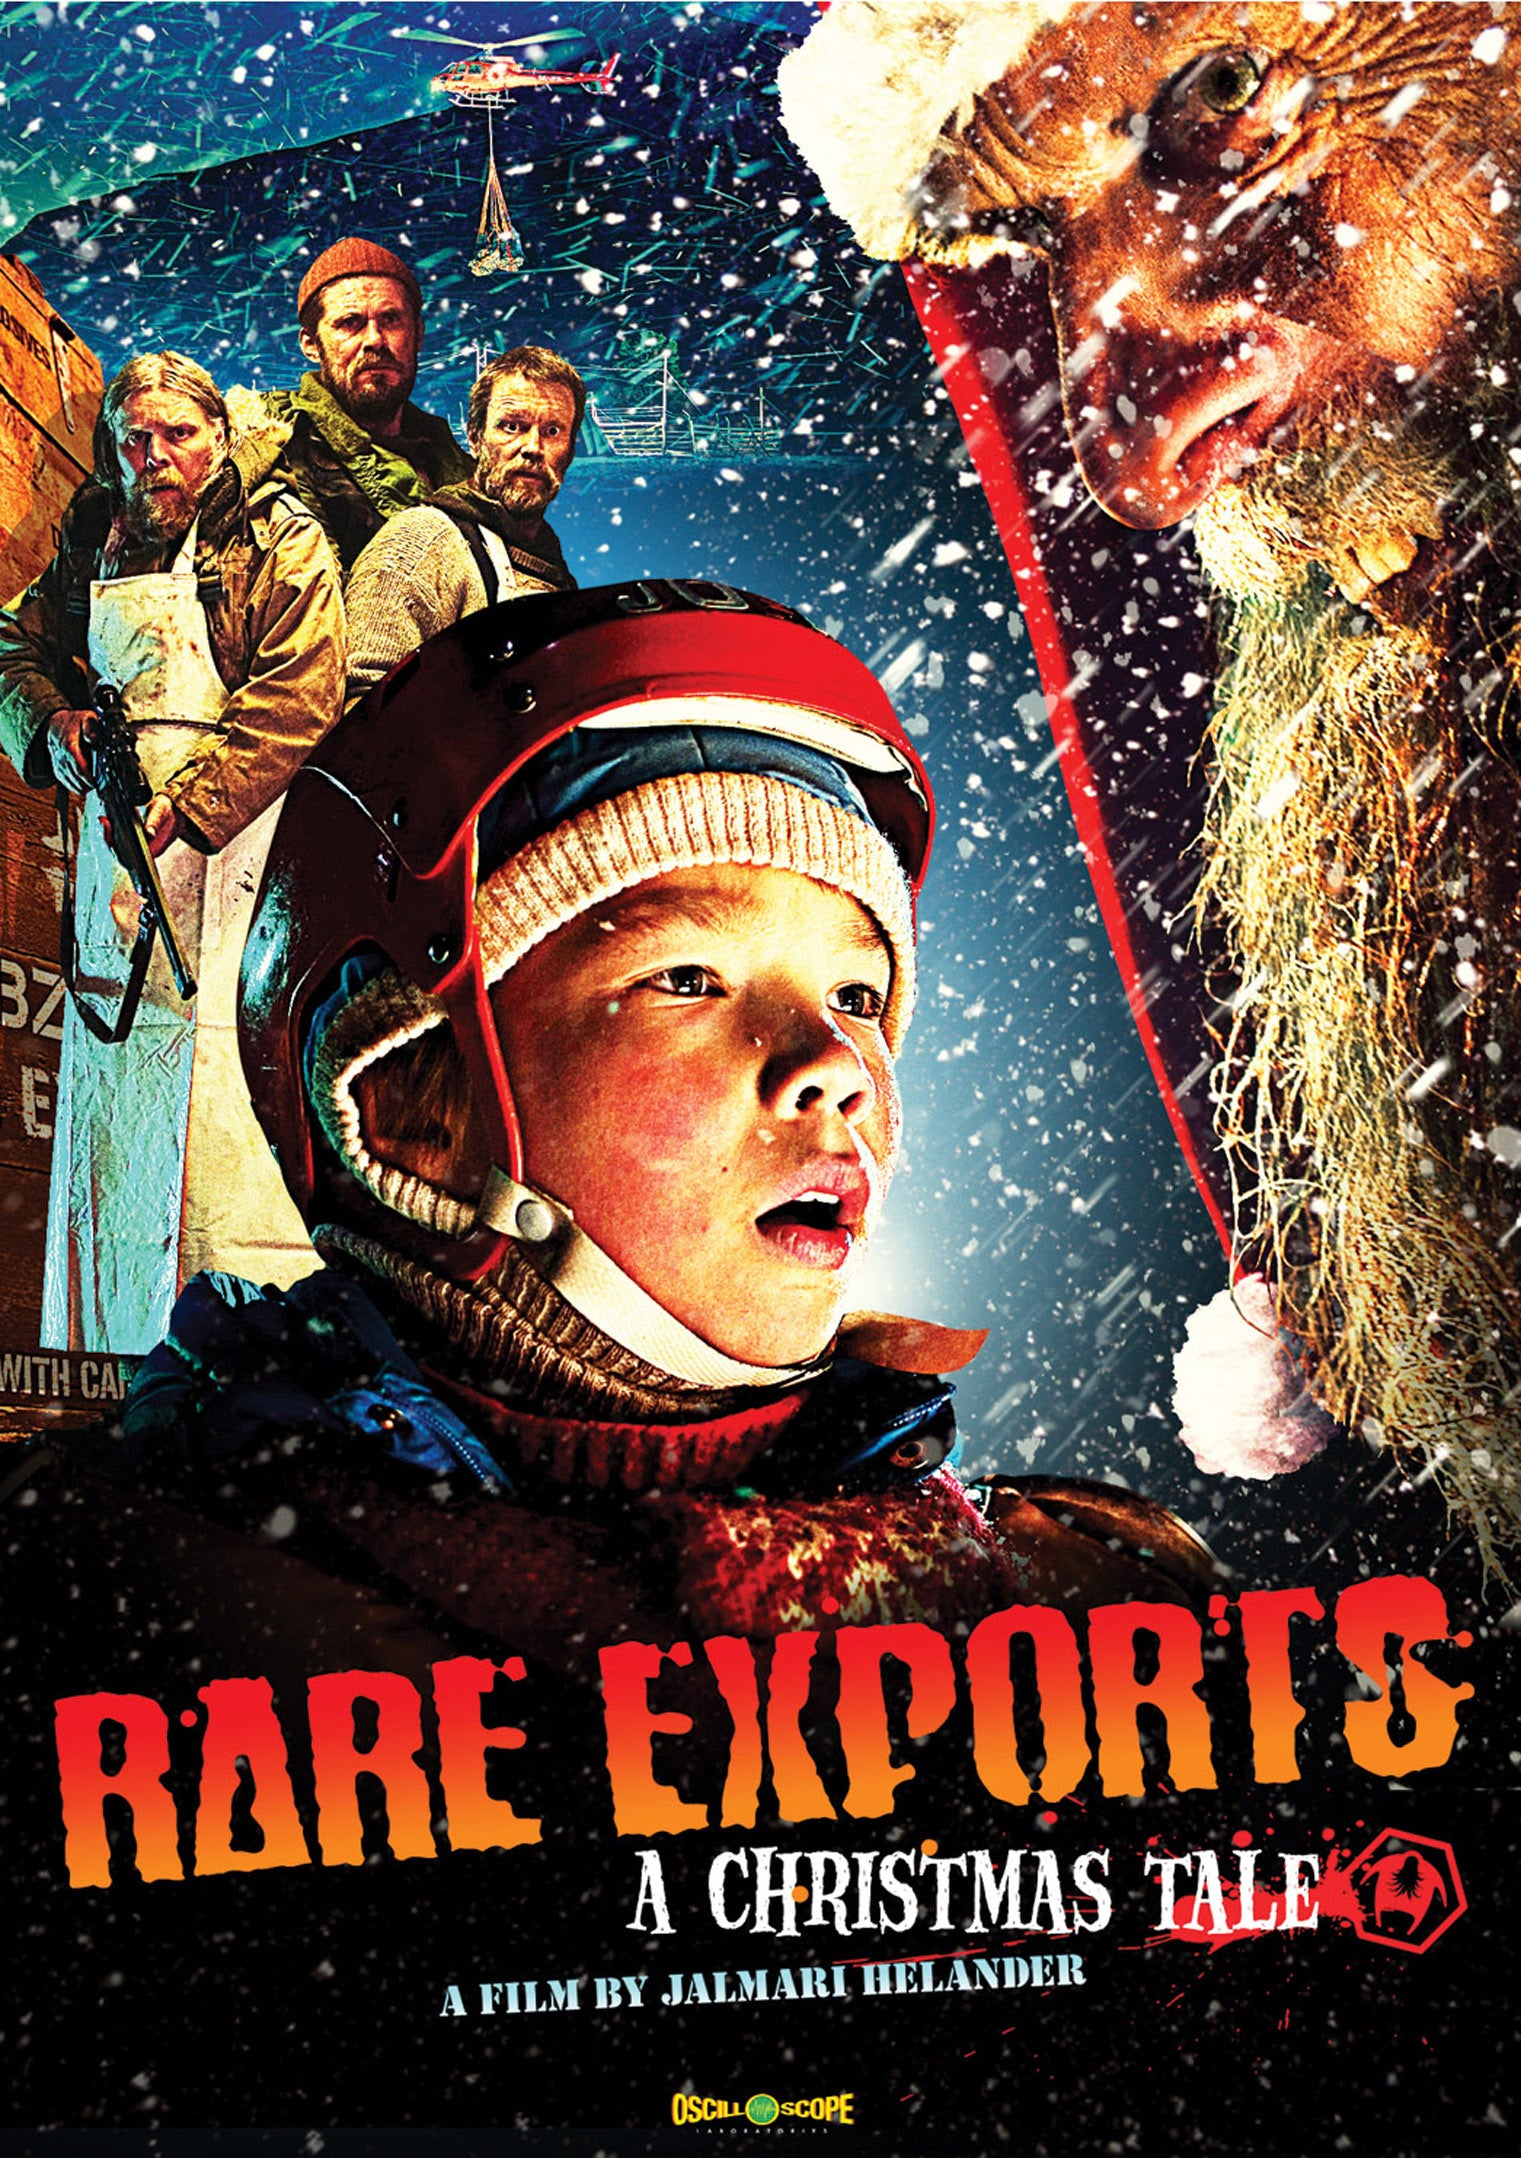 RARE EXPORTS: A CHRISTMAS TALE DVD